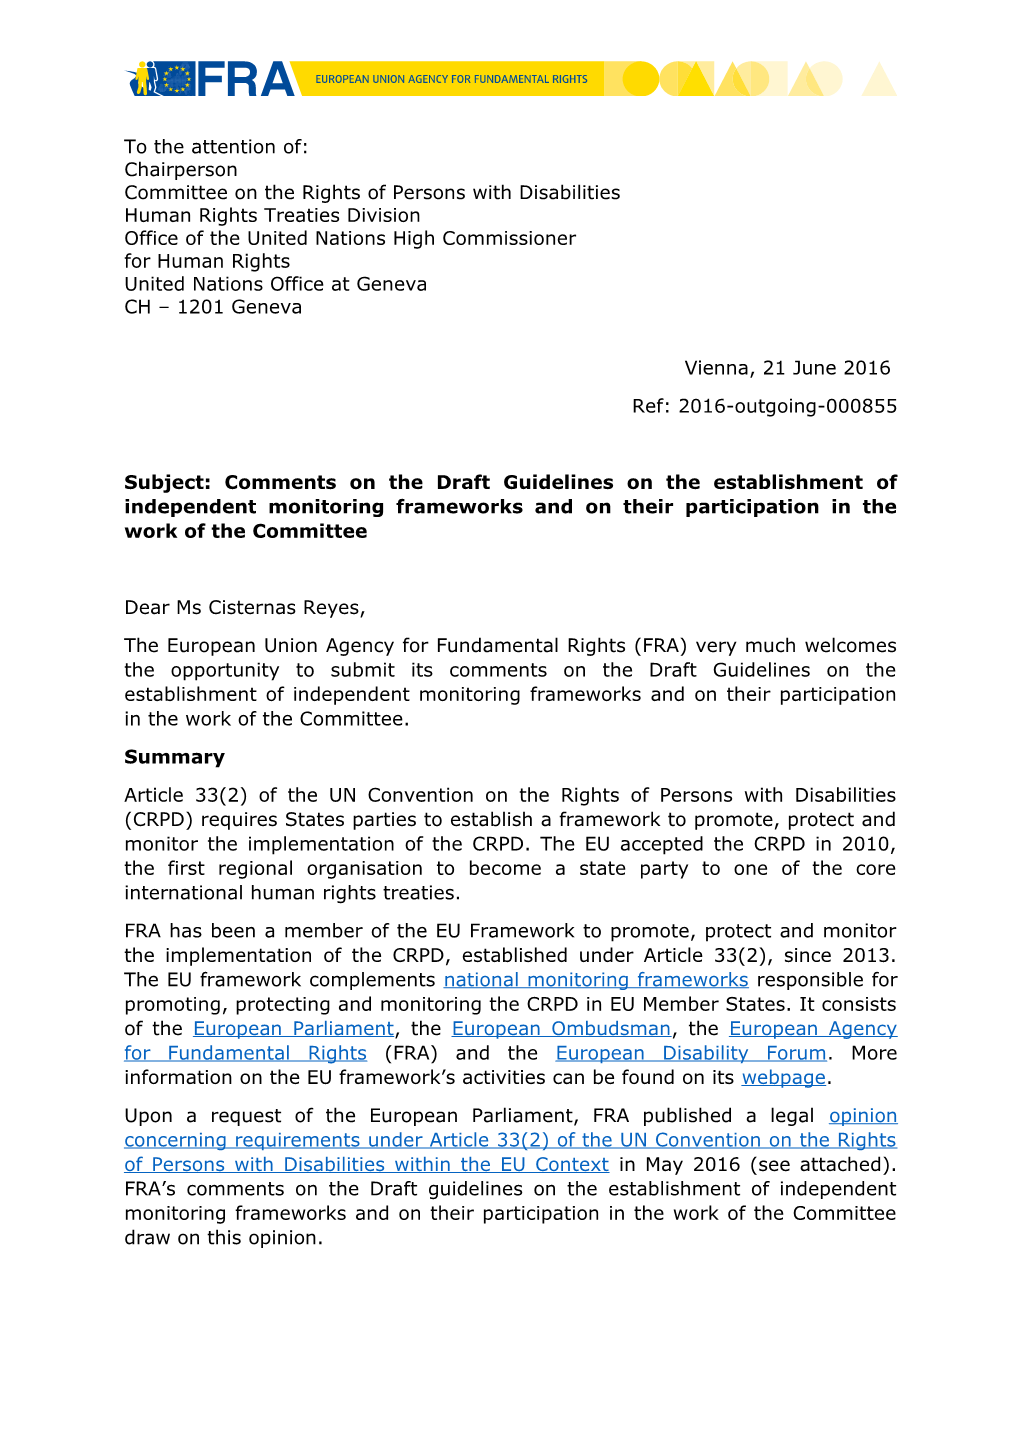 Subject: Commentson the Draft Guidelines on the Establishment of Independent Monitoring